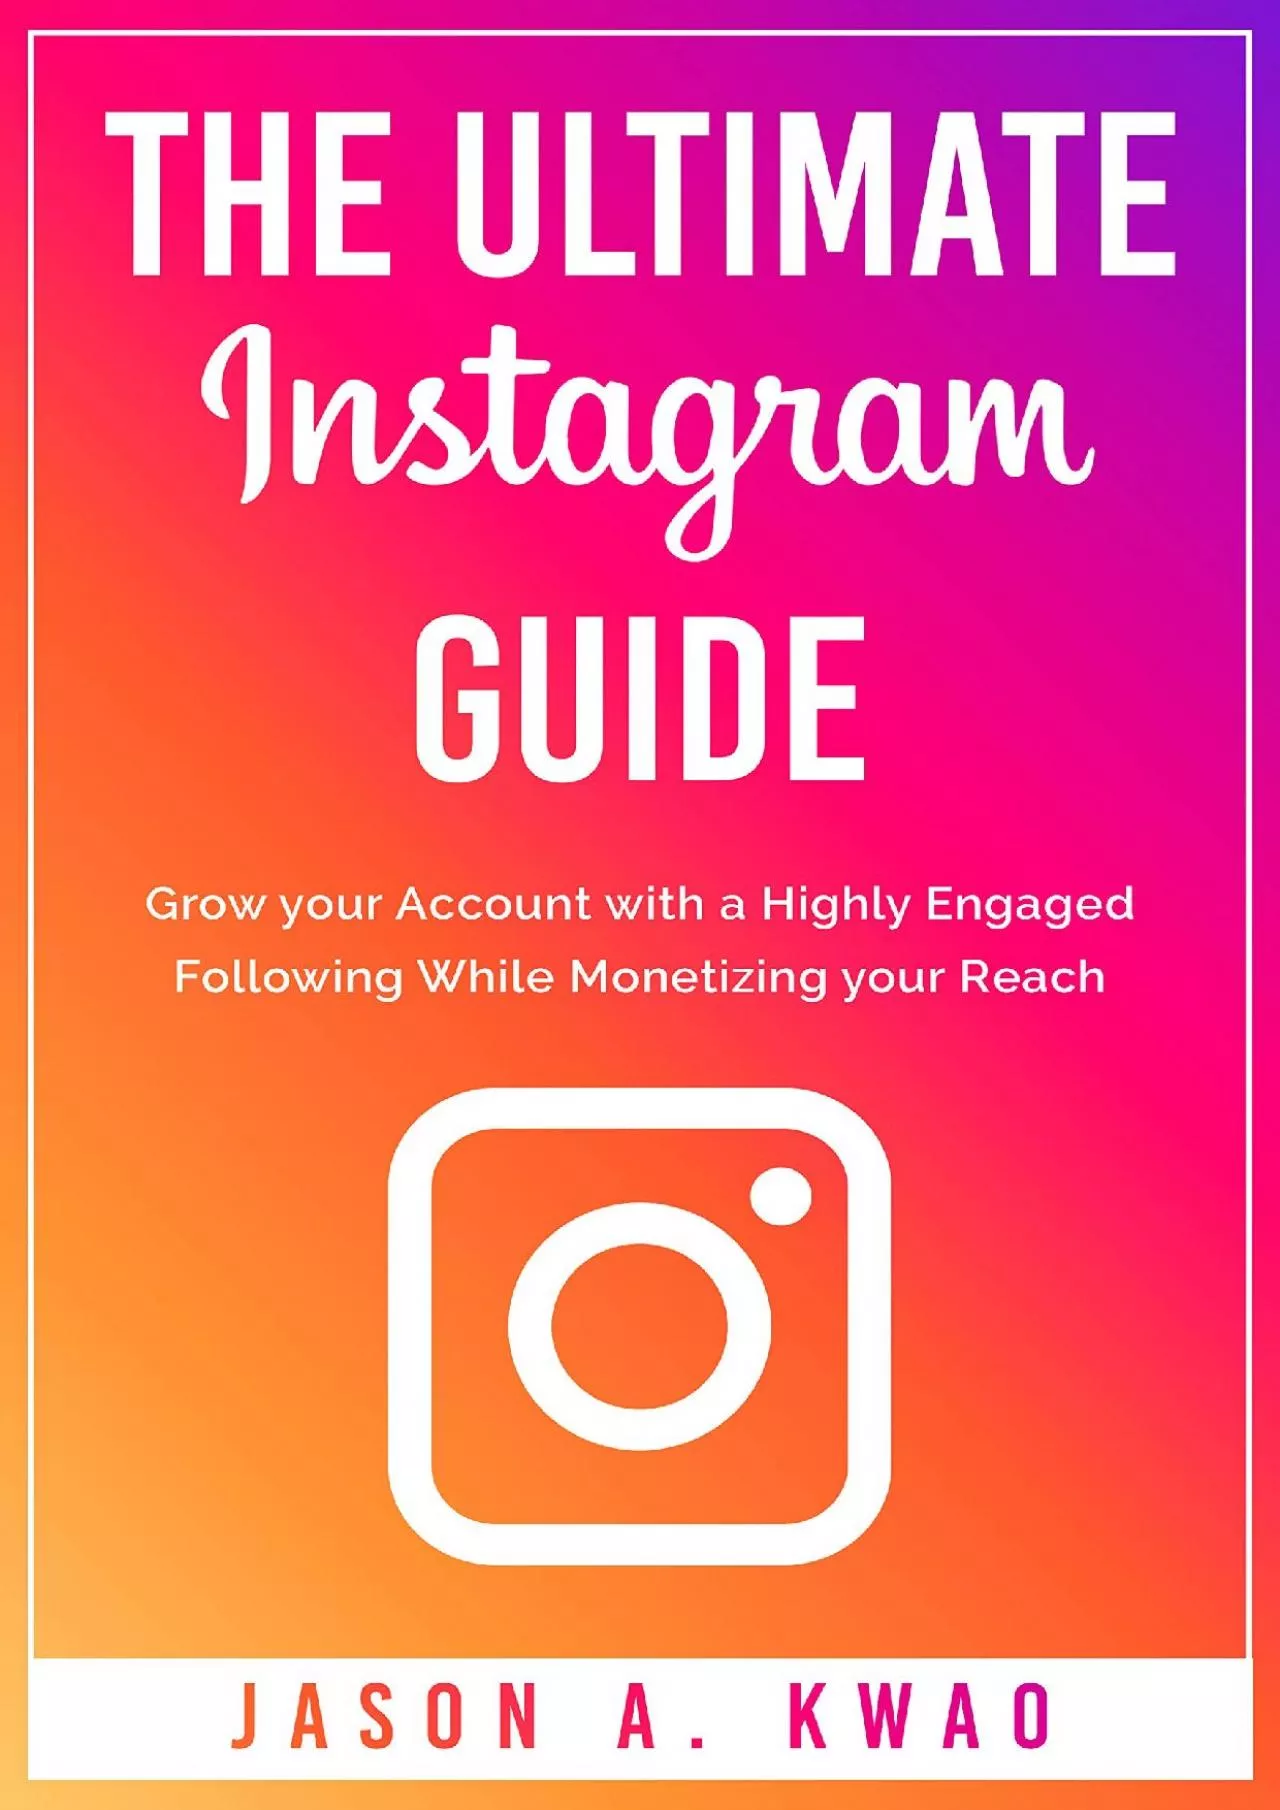 The Ultimate Instagram Guide: Grow your Account with a Highly Engaged Following While